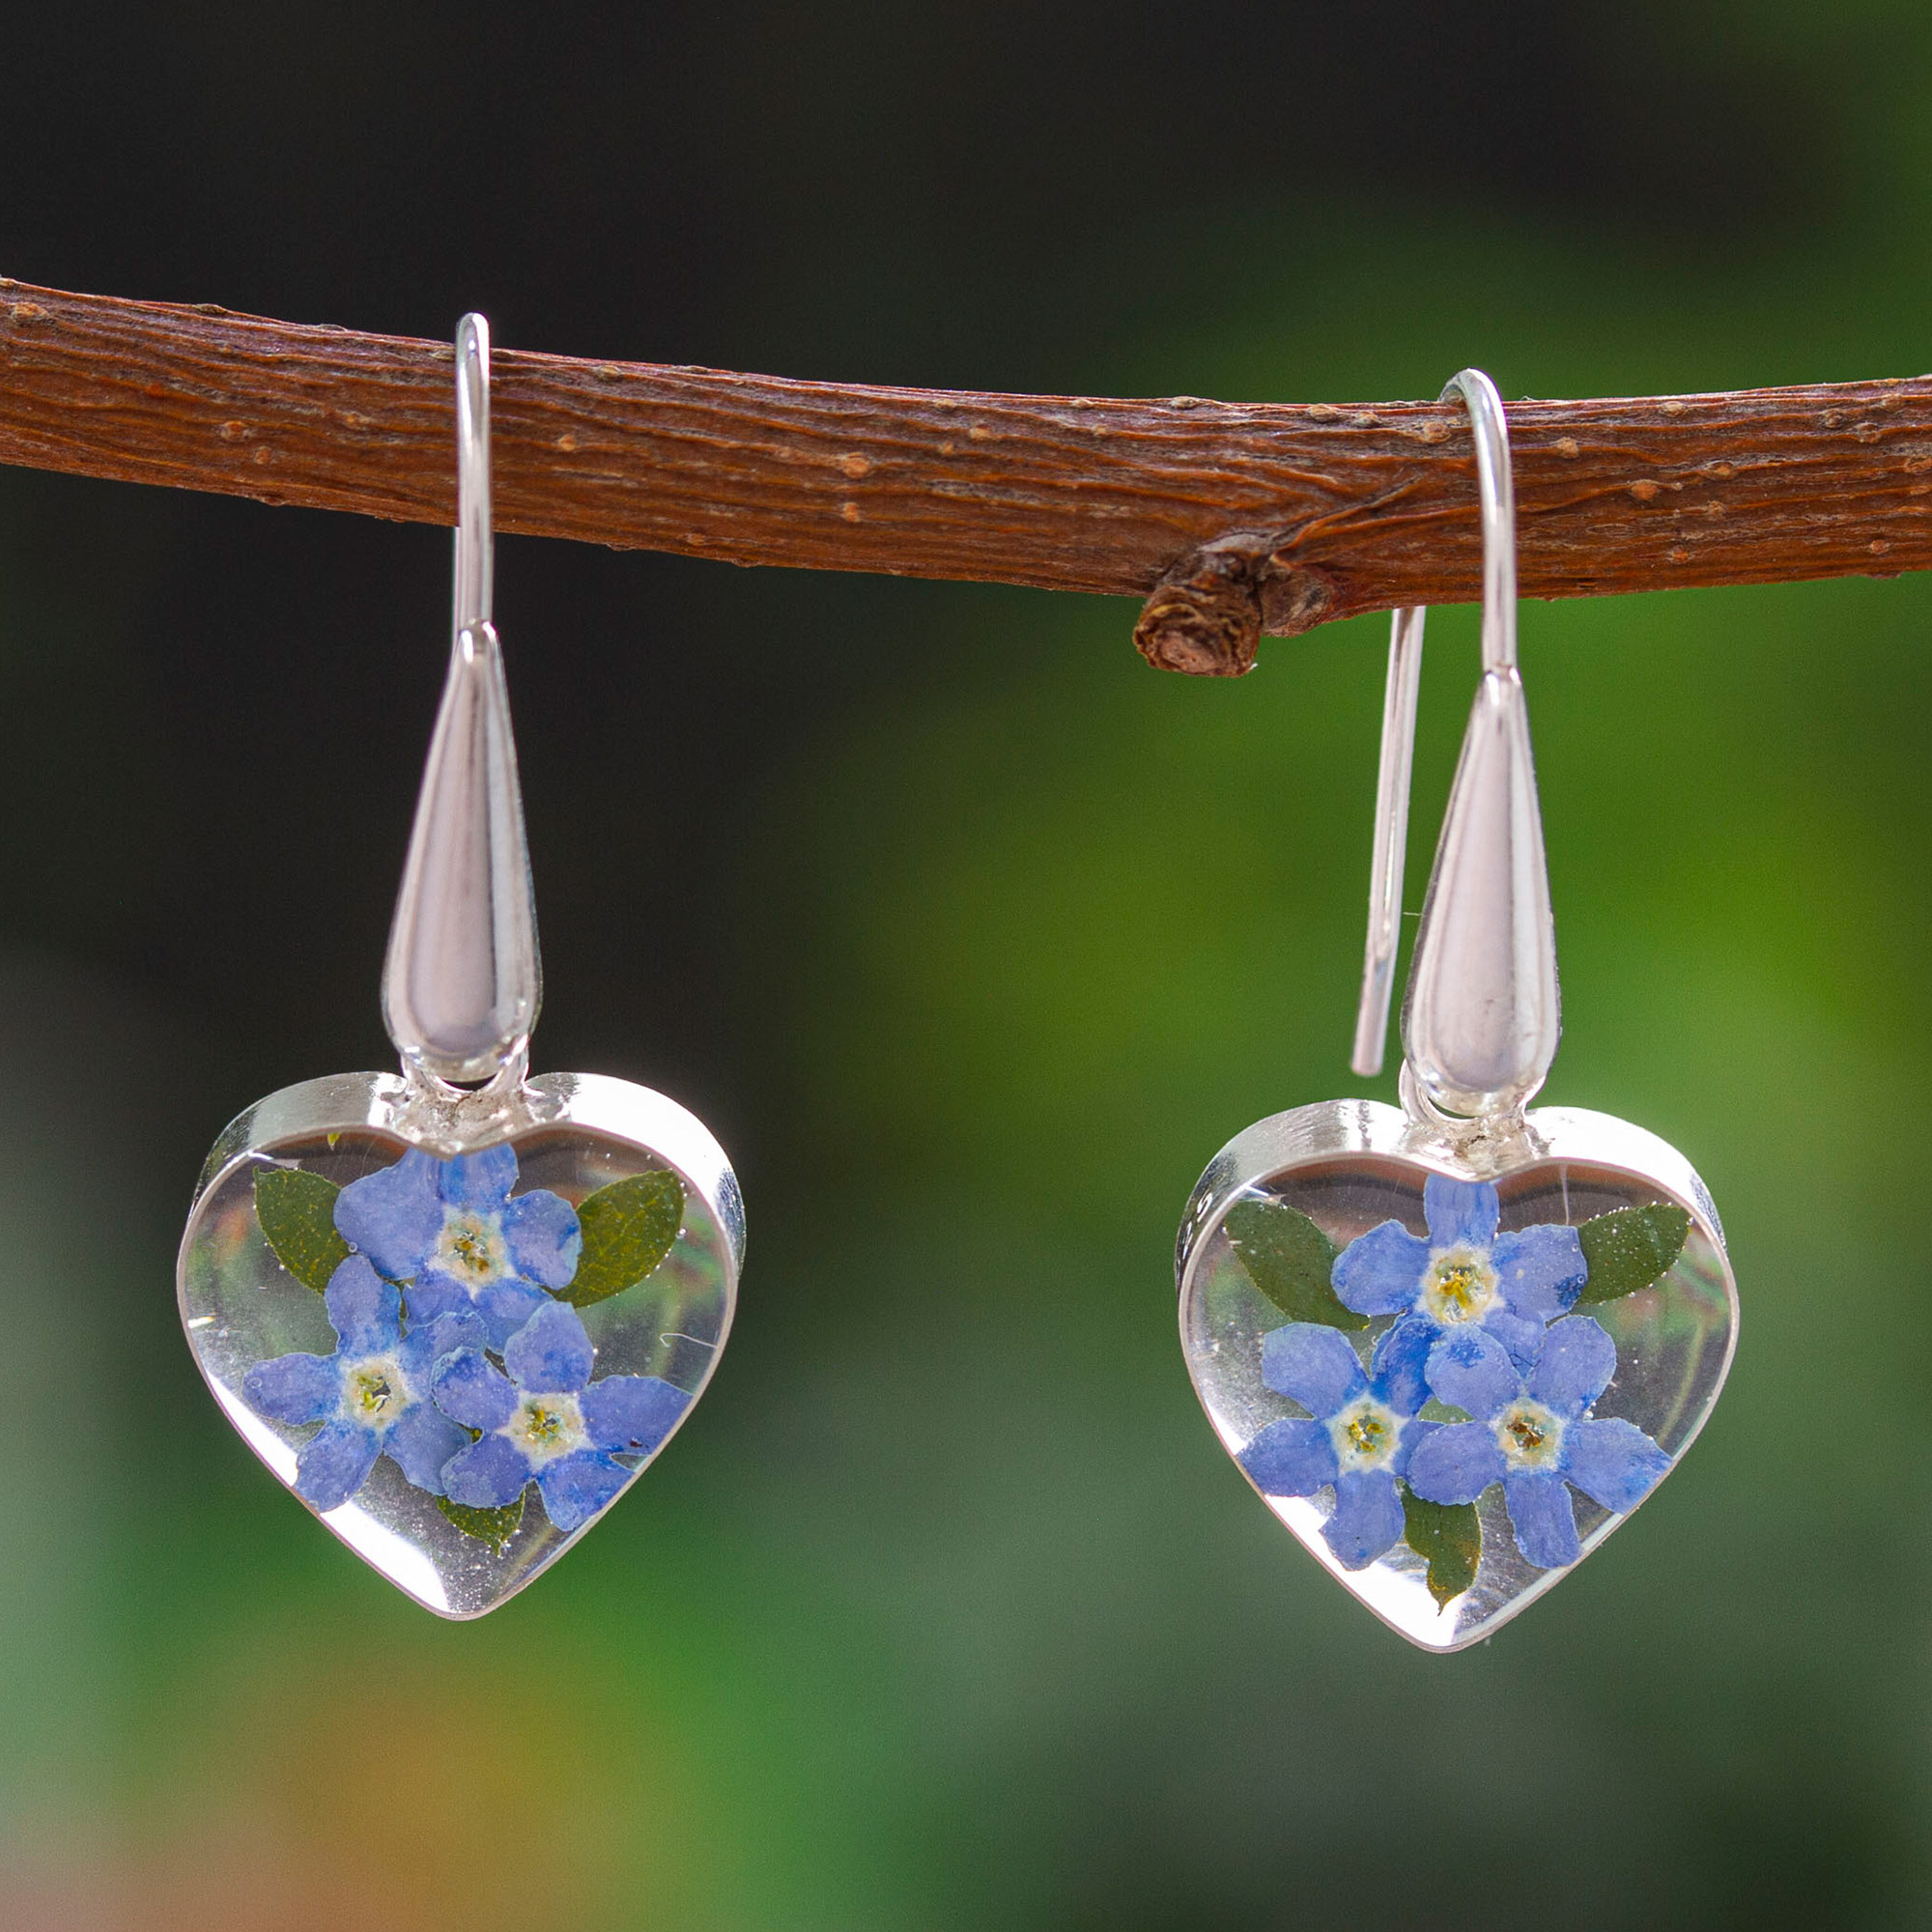 I Preserve The Beauty Of Nature In Eco-Resin Jewelry